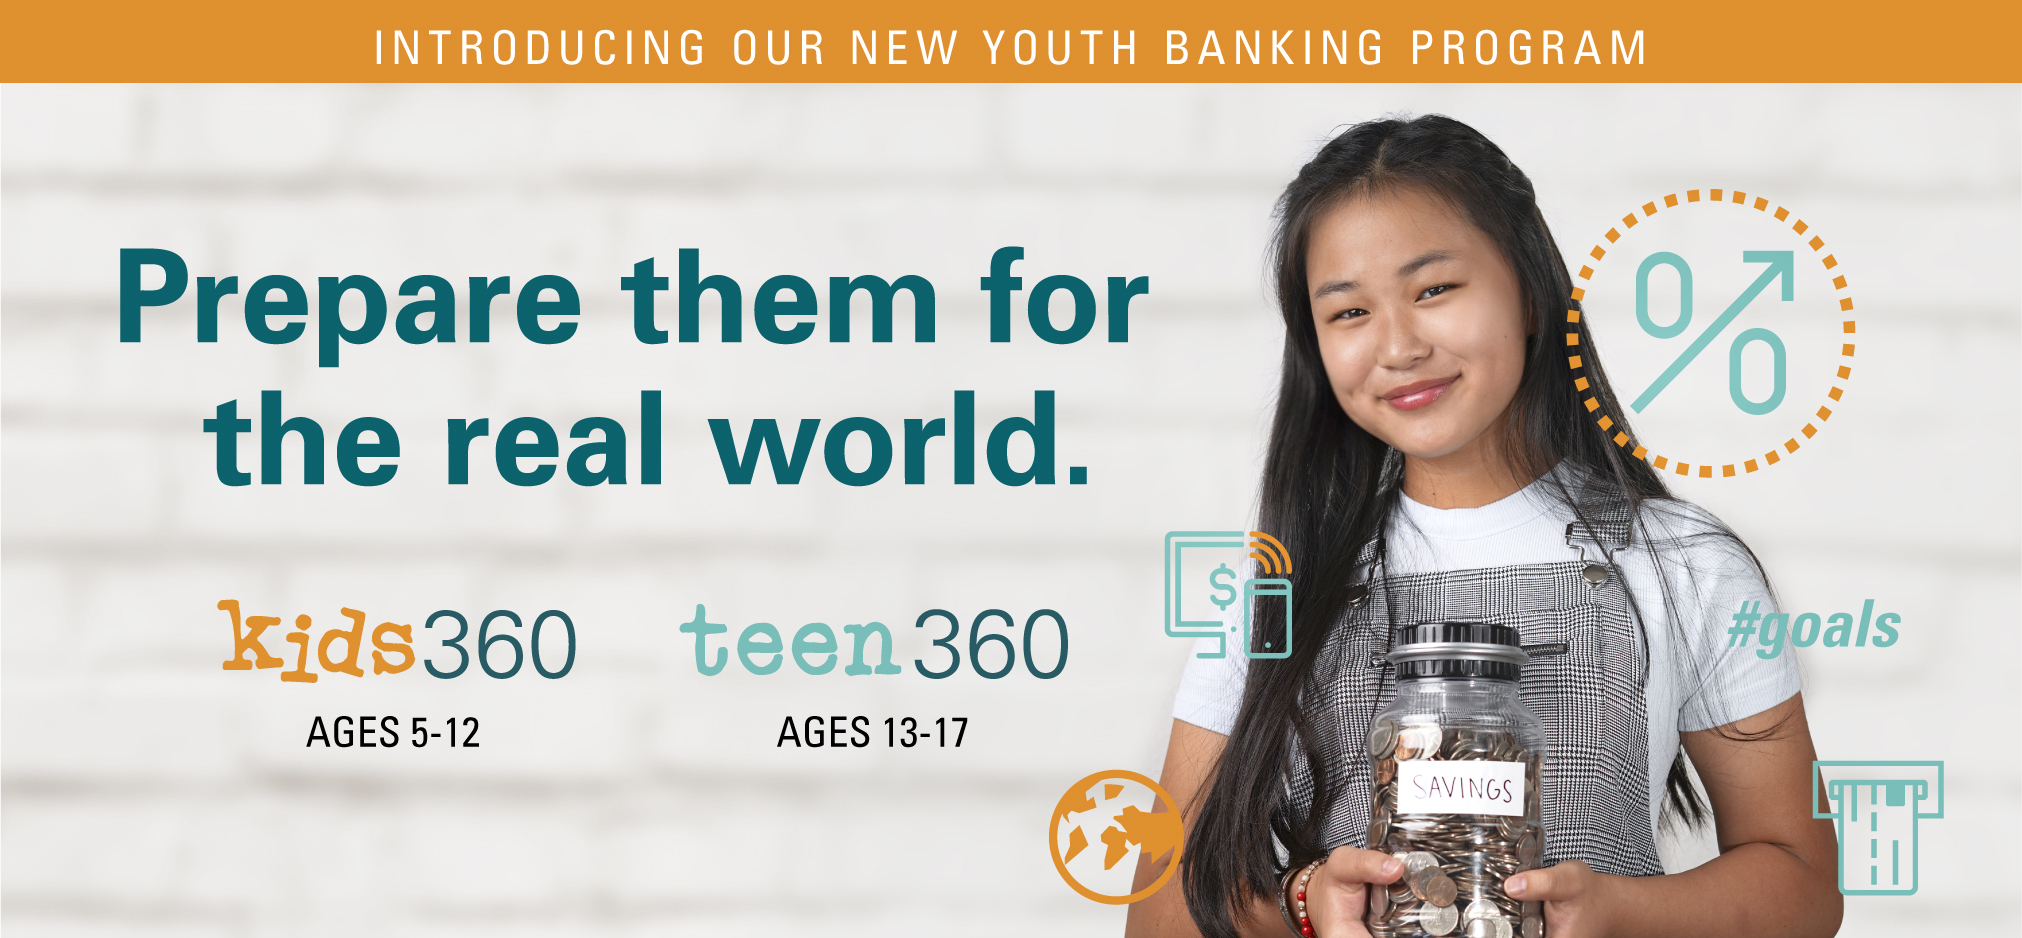 Prepare them for the real world. Kids360 ages 5 -12. Teen360 ages 13-17